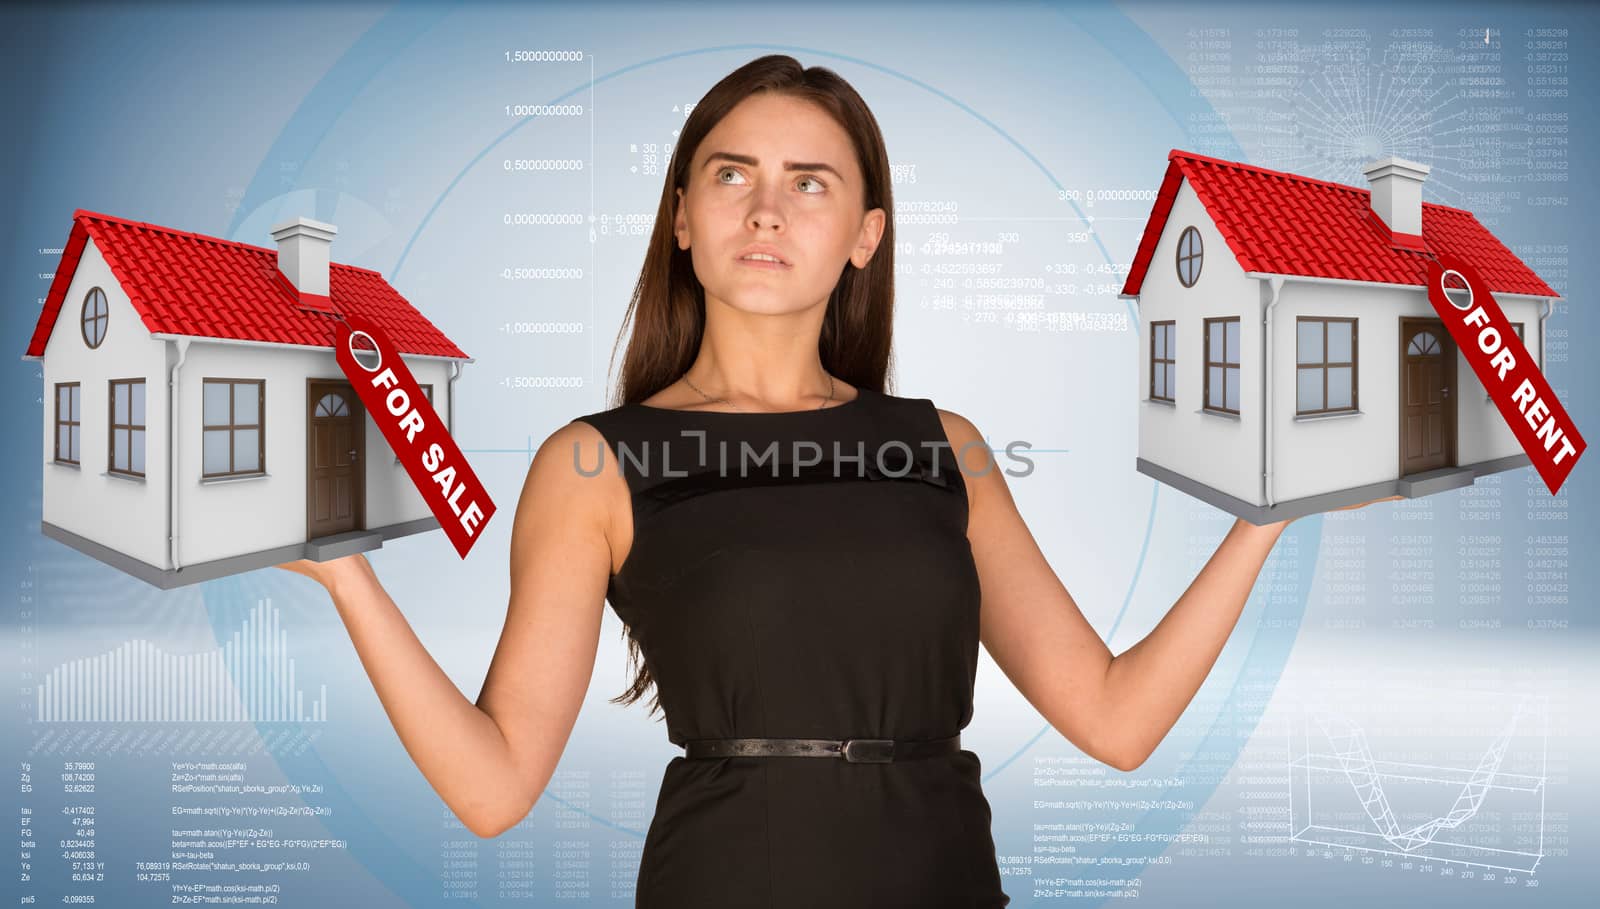 Businesswoman holding two house with tags for sale and rent. Hi-tech graphs as backdrop. Business concept